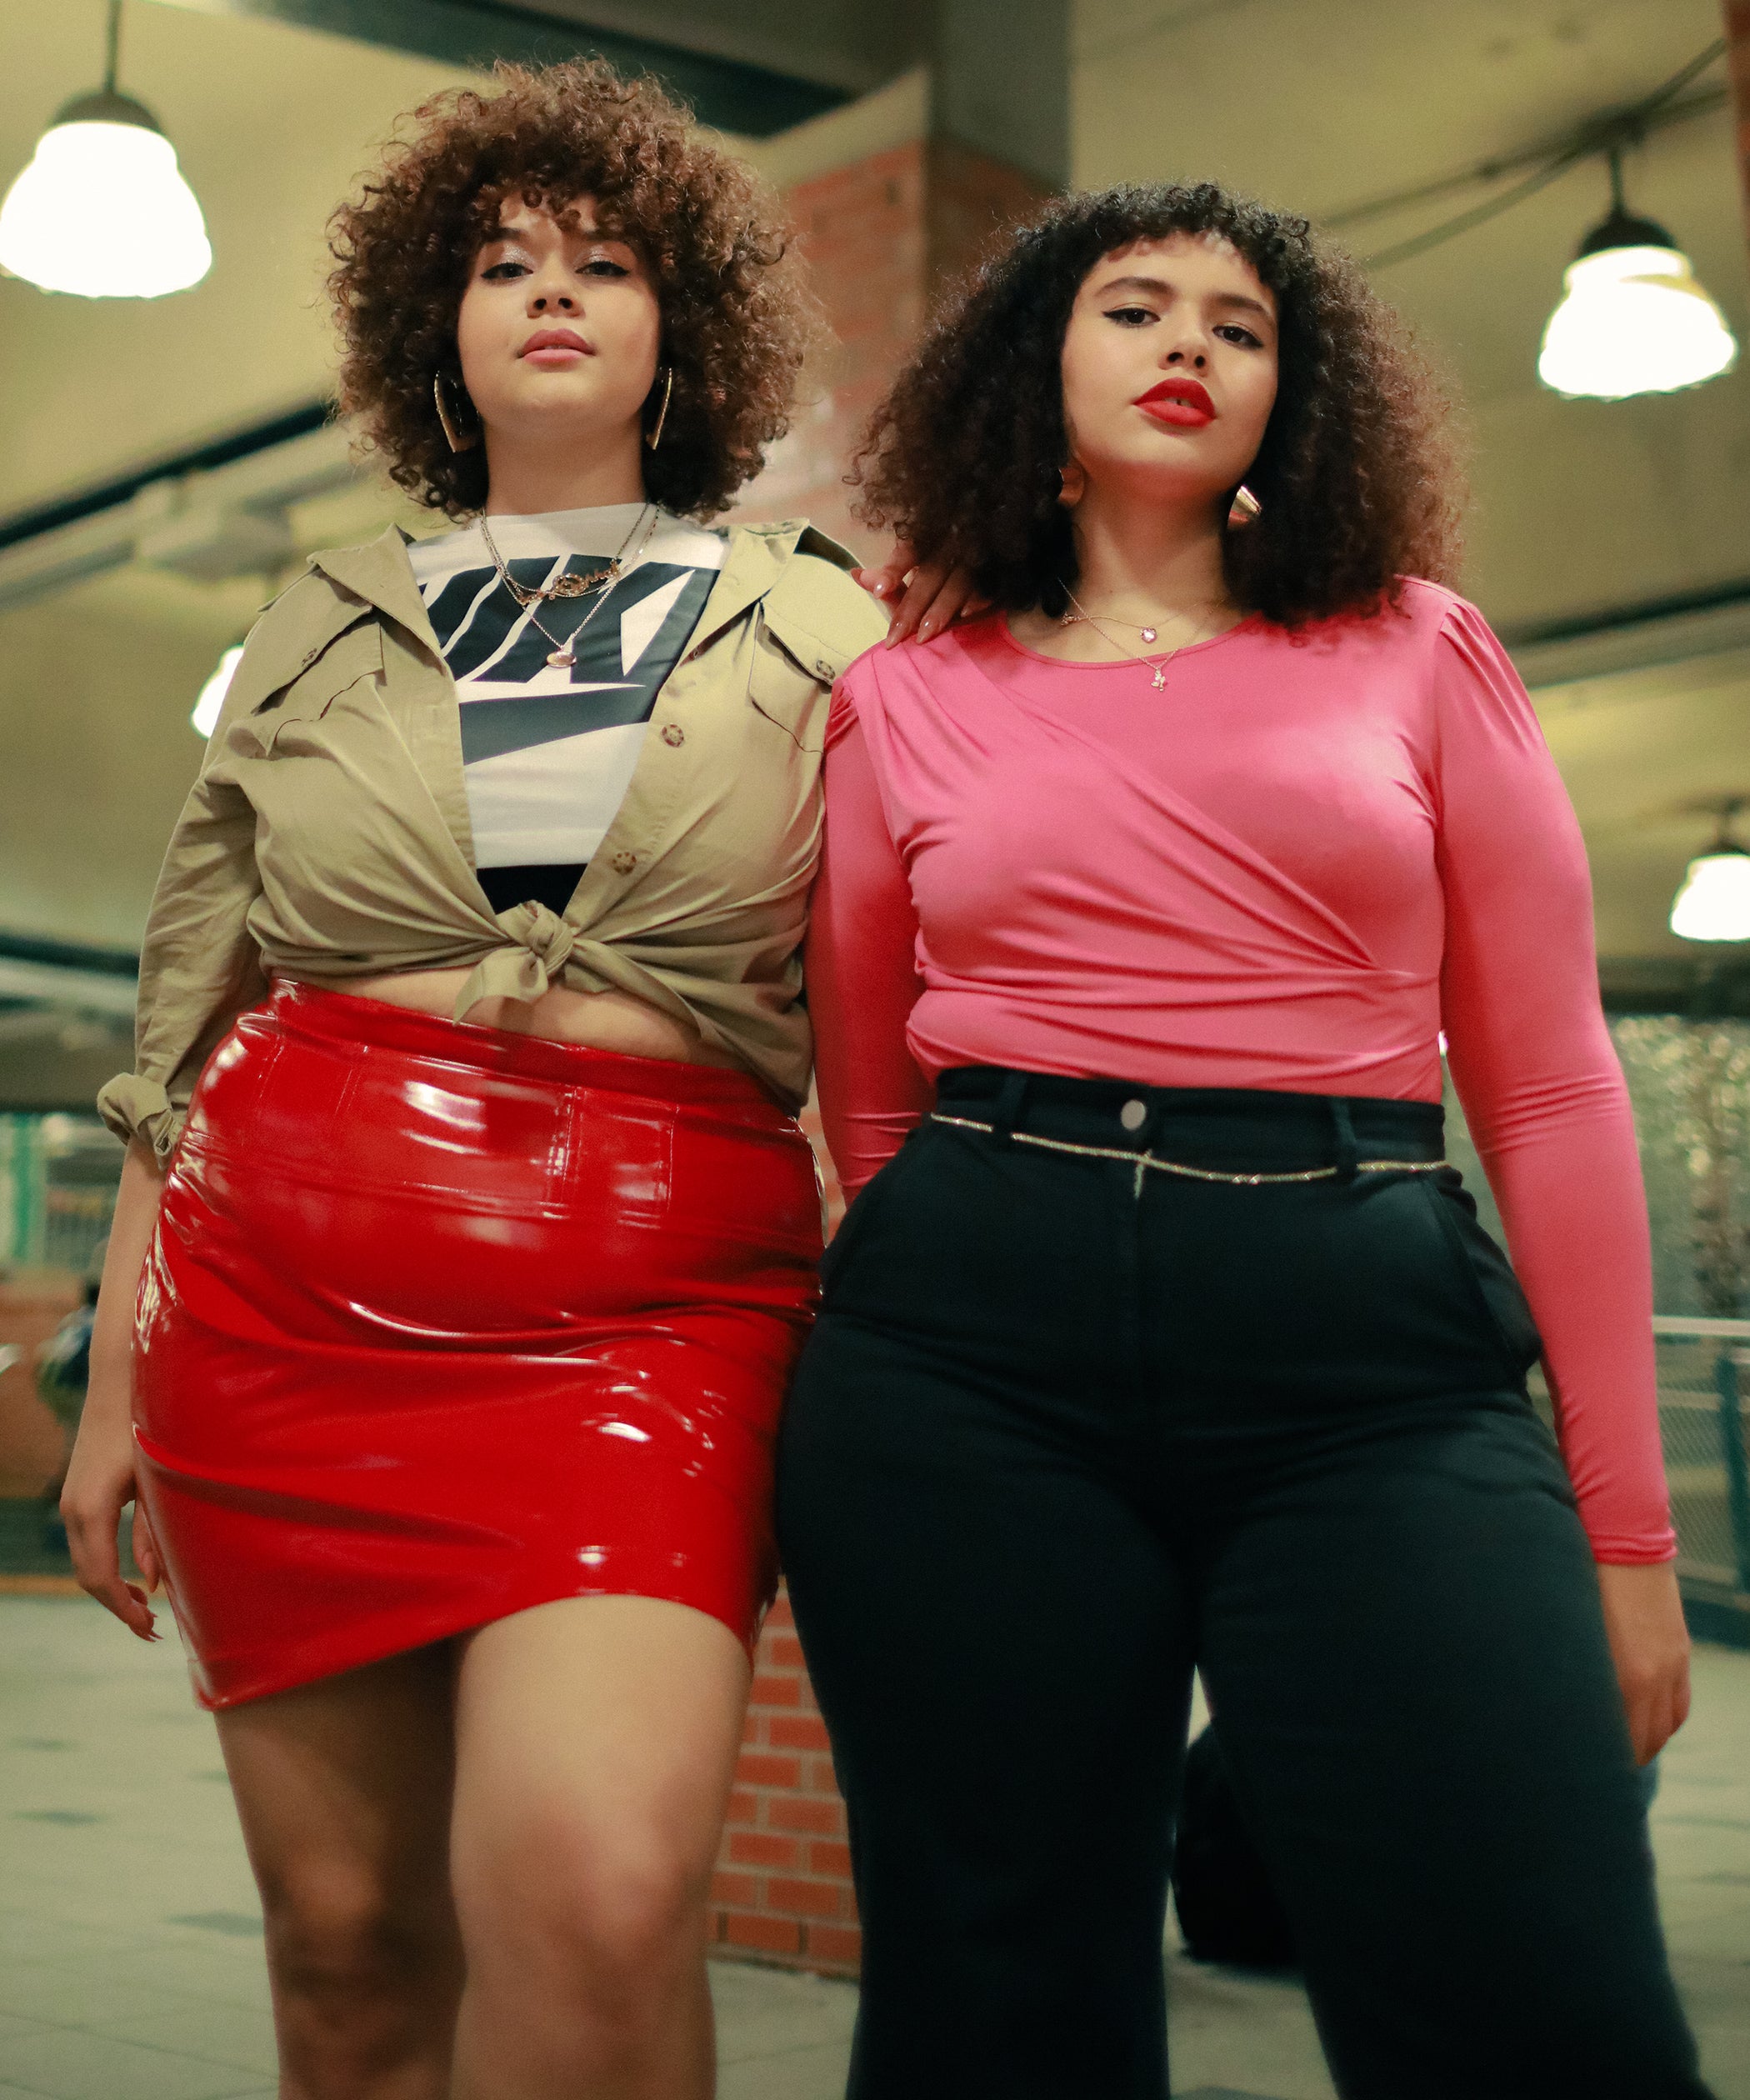 It's hard finding sustainable fashion for plus-size women. Here's